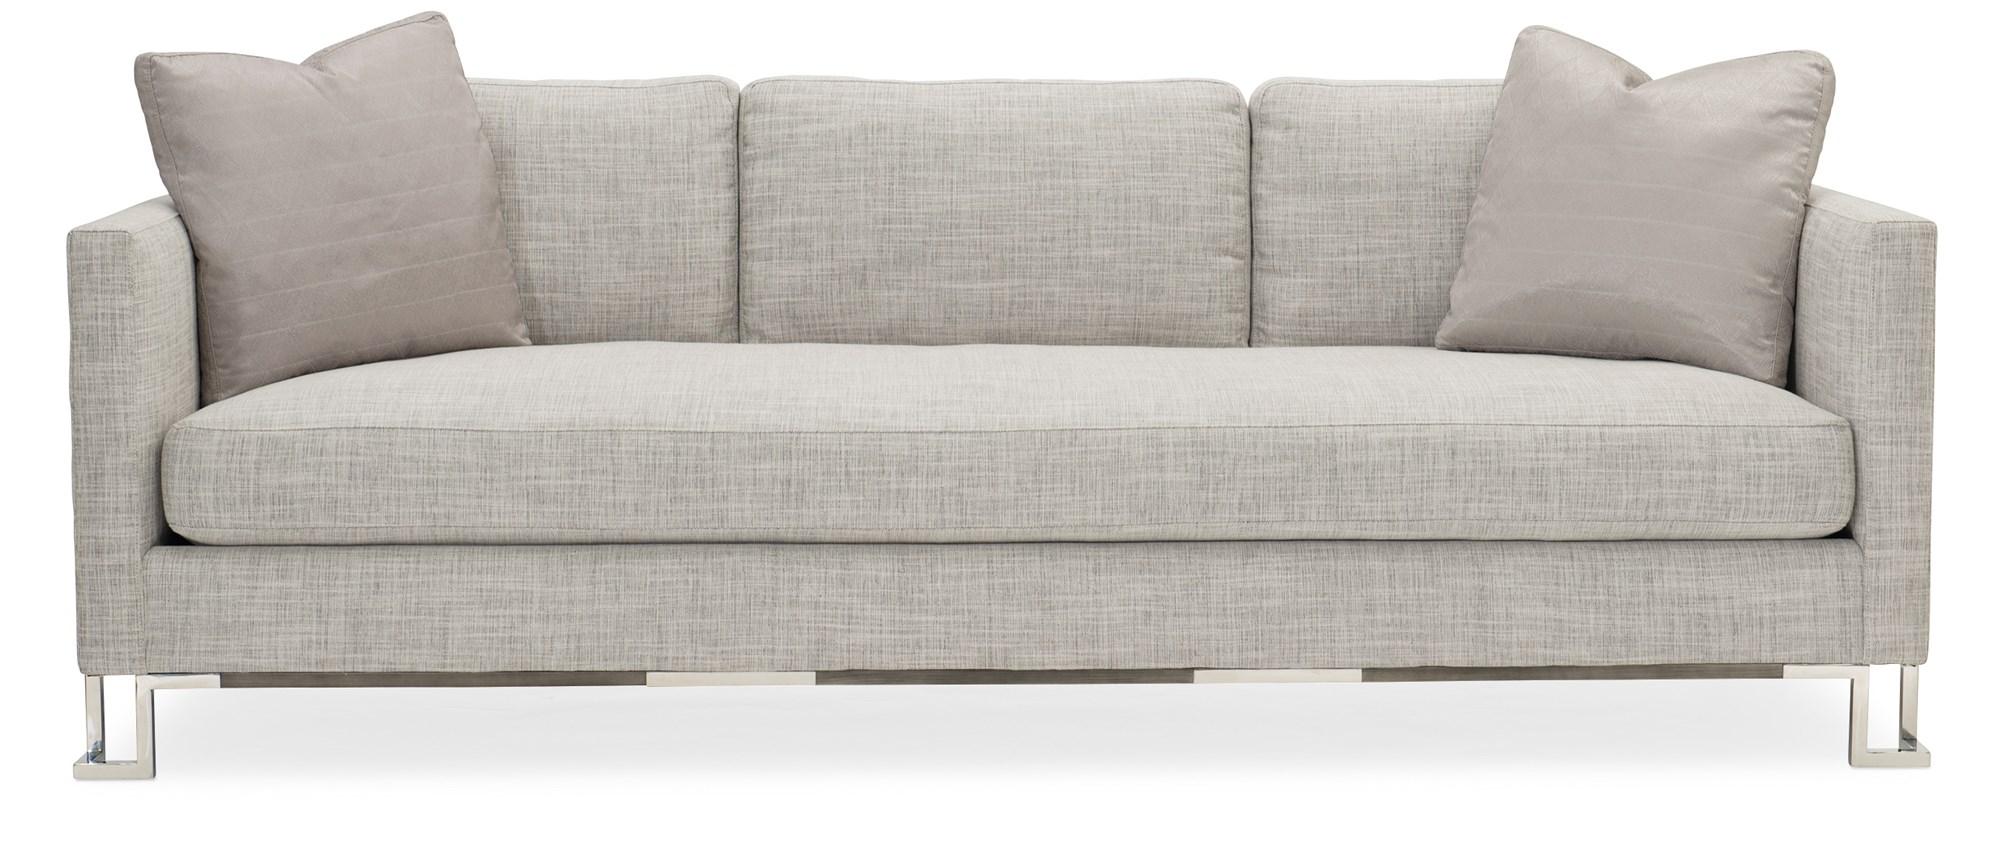 

    
Moonlight Silver Fabric & Stainless-Steel Frame Sofa OPEN FRAMEWORK by Caracole
